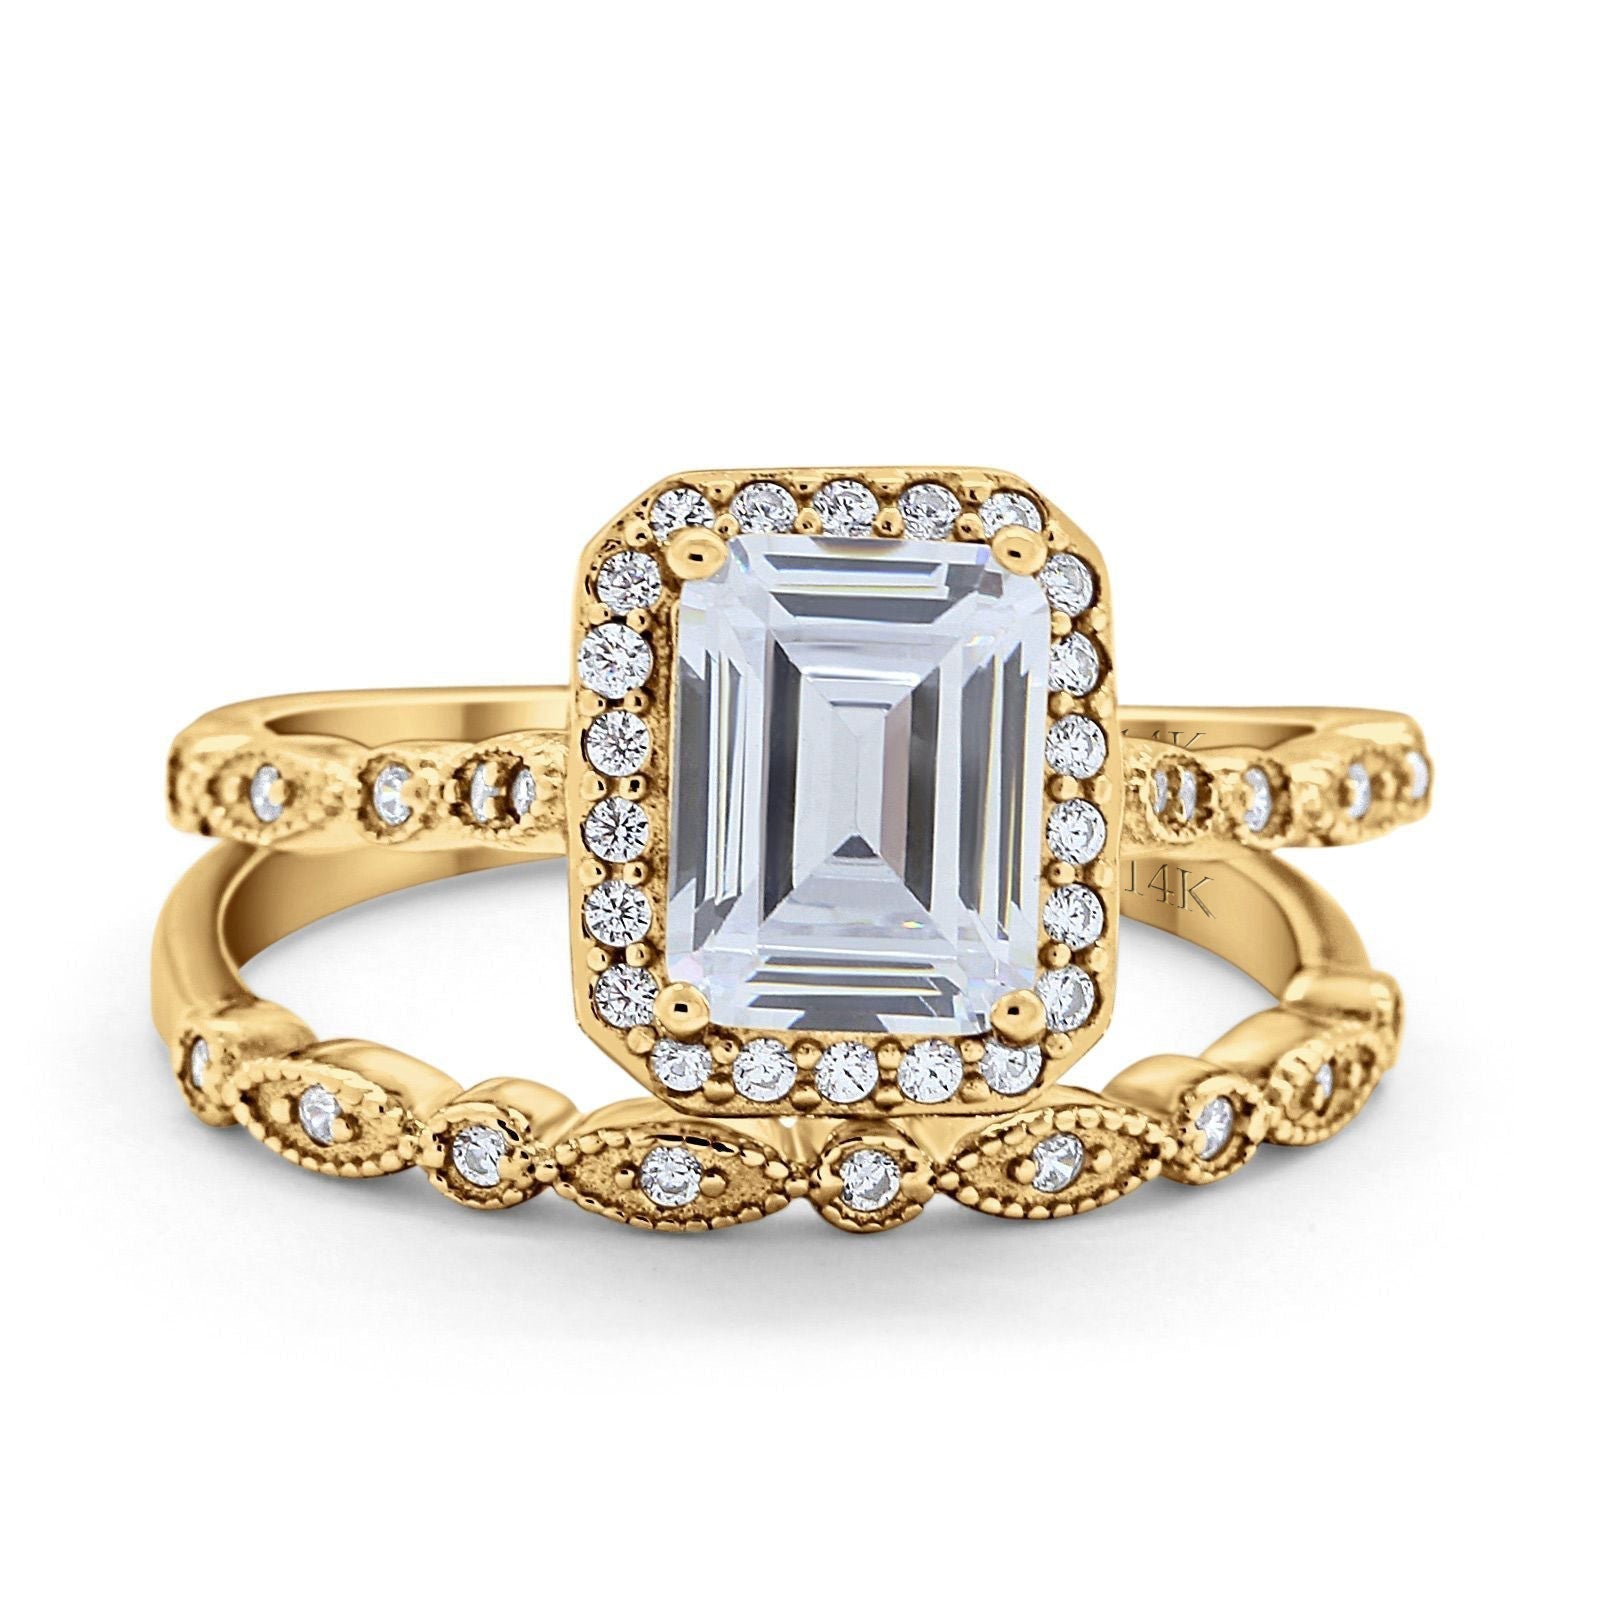 14K Gold Emerald Cut Shape Simulated Cubic Zirconia Bridal Set Engagement Two Piece Band Ring